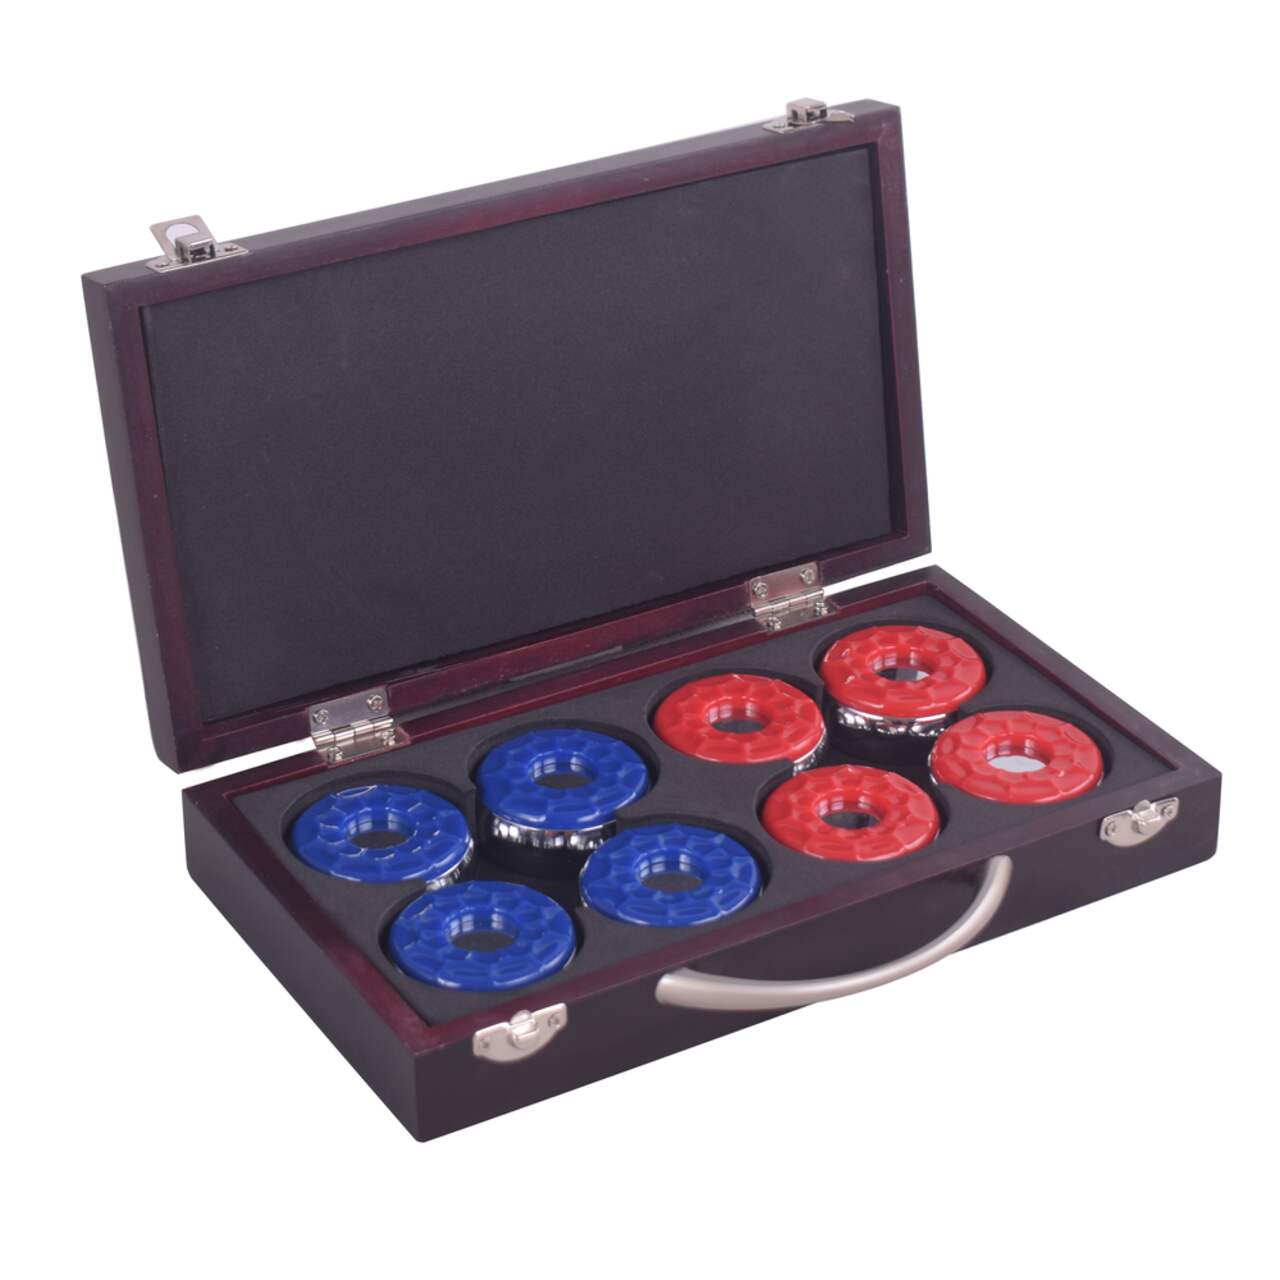 https://media-www.canadiantire.ca/product/playing/team-sports-and-golf/indoor-games/7745985/hathaway-shuffleboard-pucks-with-case-set-of-8-a59ba84f-6db5-4d0d-bee0-7fda65092d9c.png?imdensity=1&imwidth=1244&impolicy=mZoom